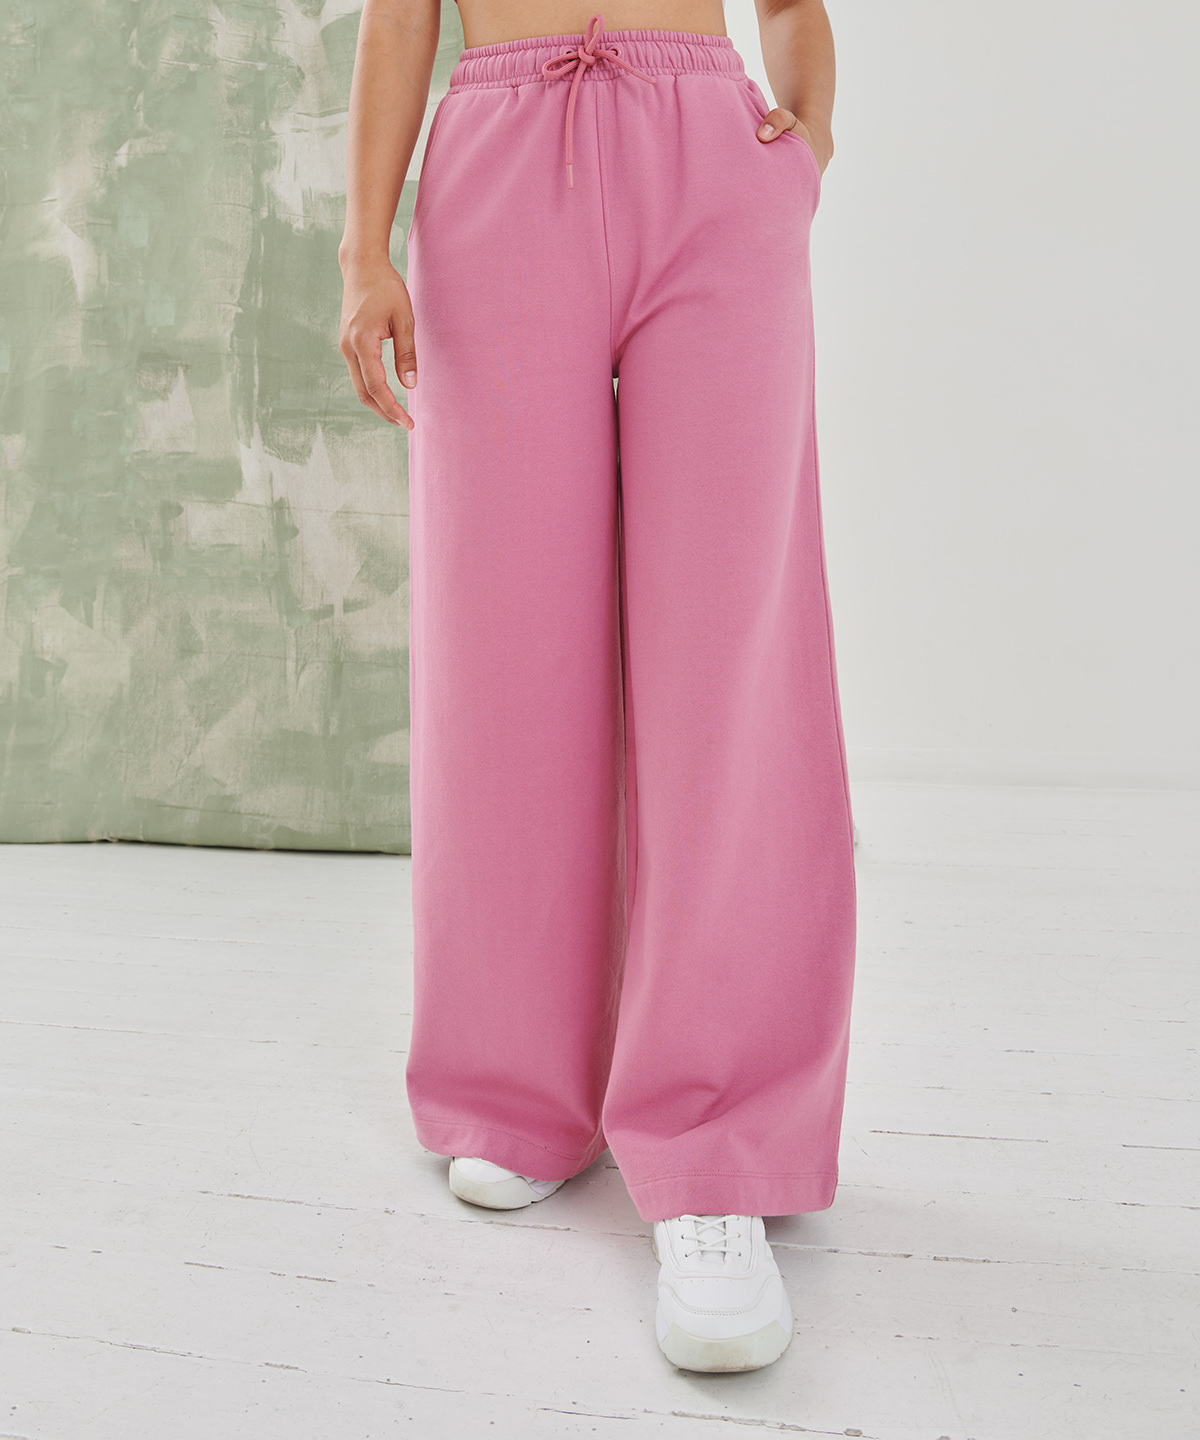 Embroidered Women's Sustainable Fashion Wide Leg Joggers